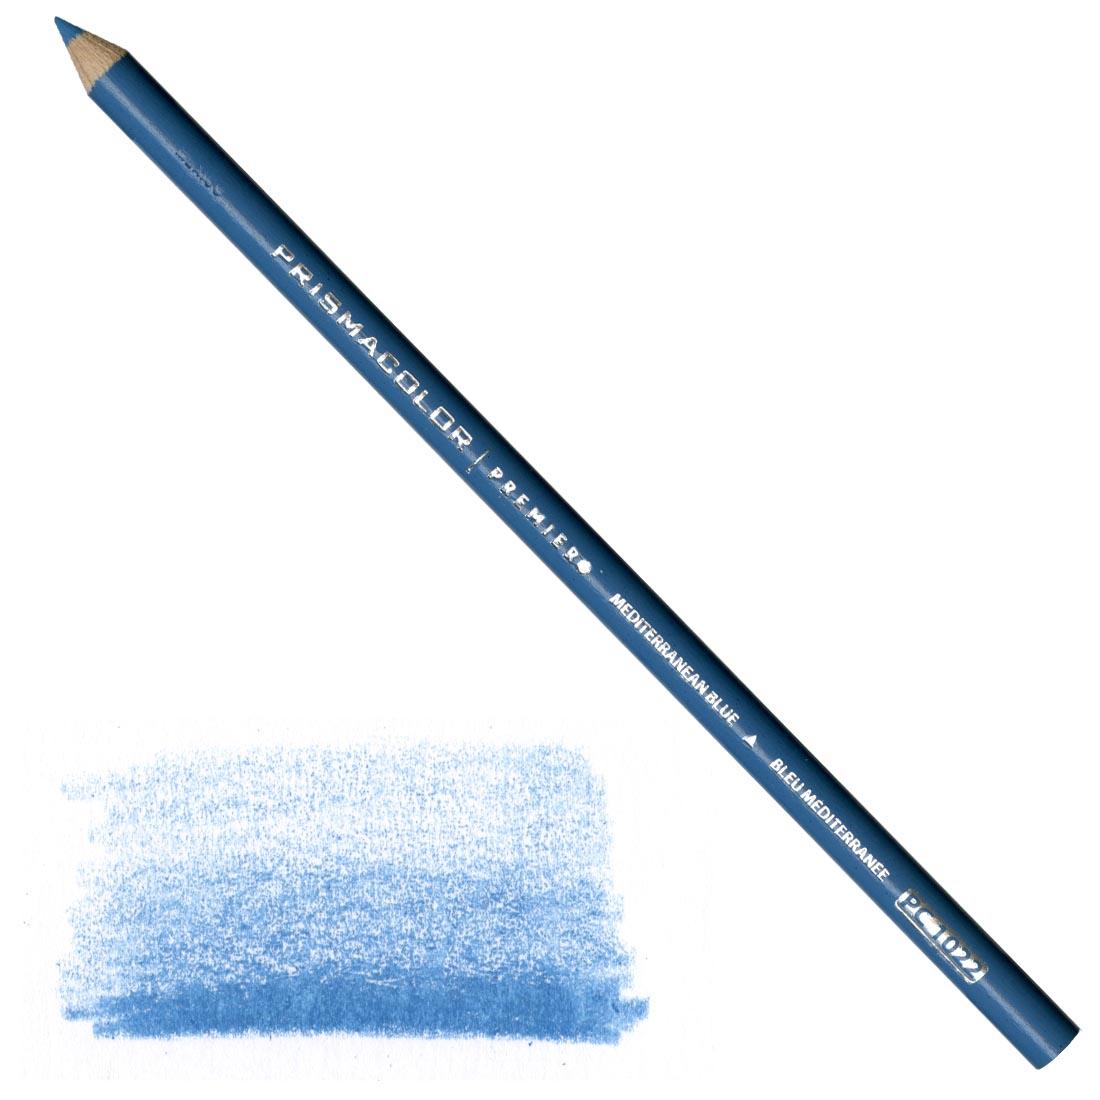 Mediterranean Blue Prismacolor Premier Colored Pencil with a sample colored swatch